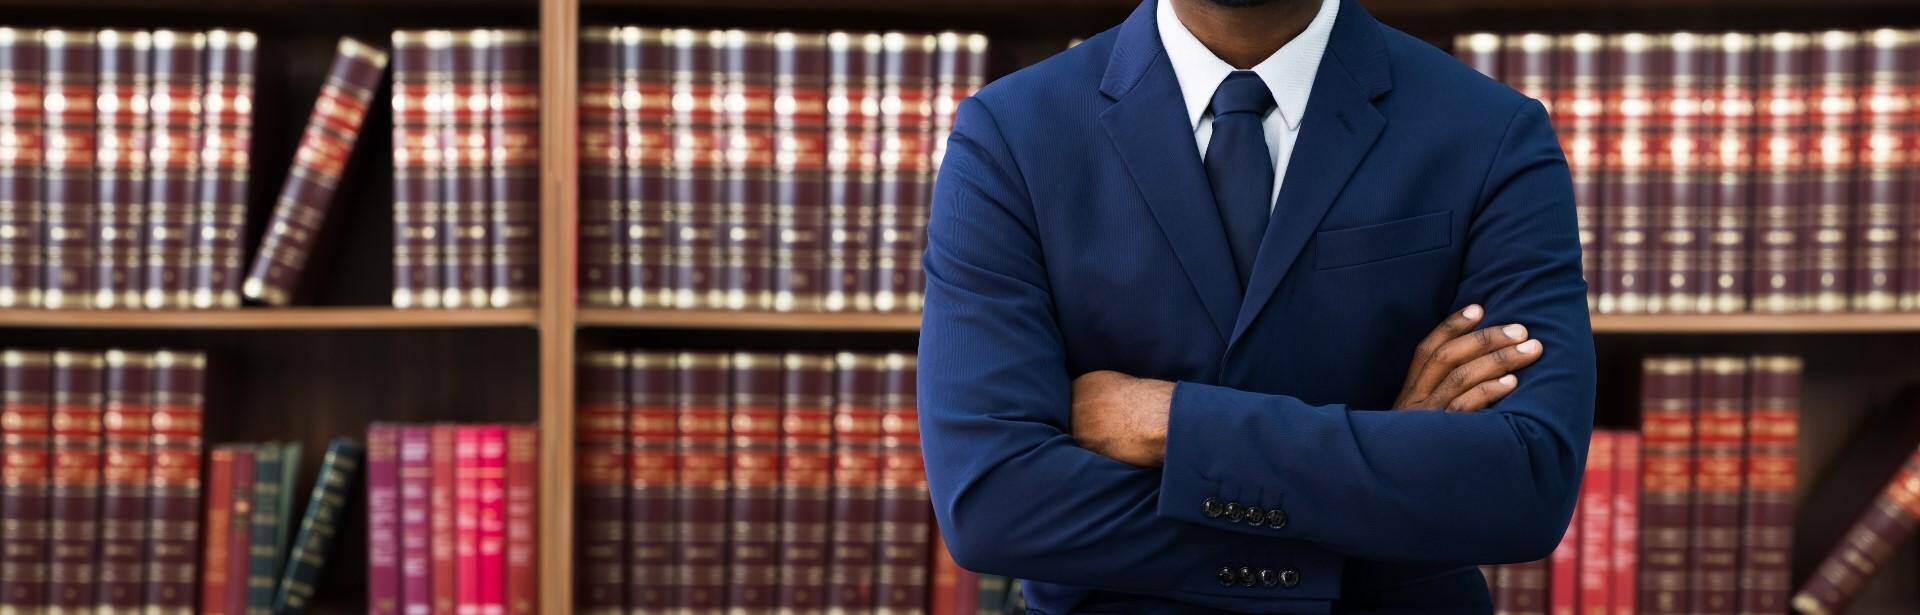 A black lawyer standing in front of a bookshelf of law book in McDonough, Georgia